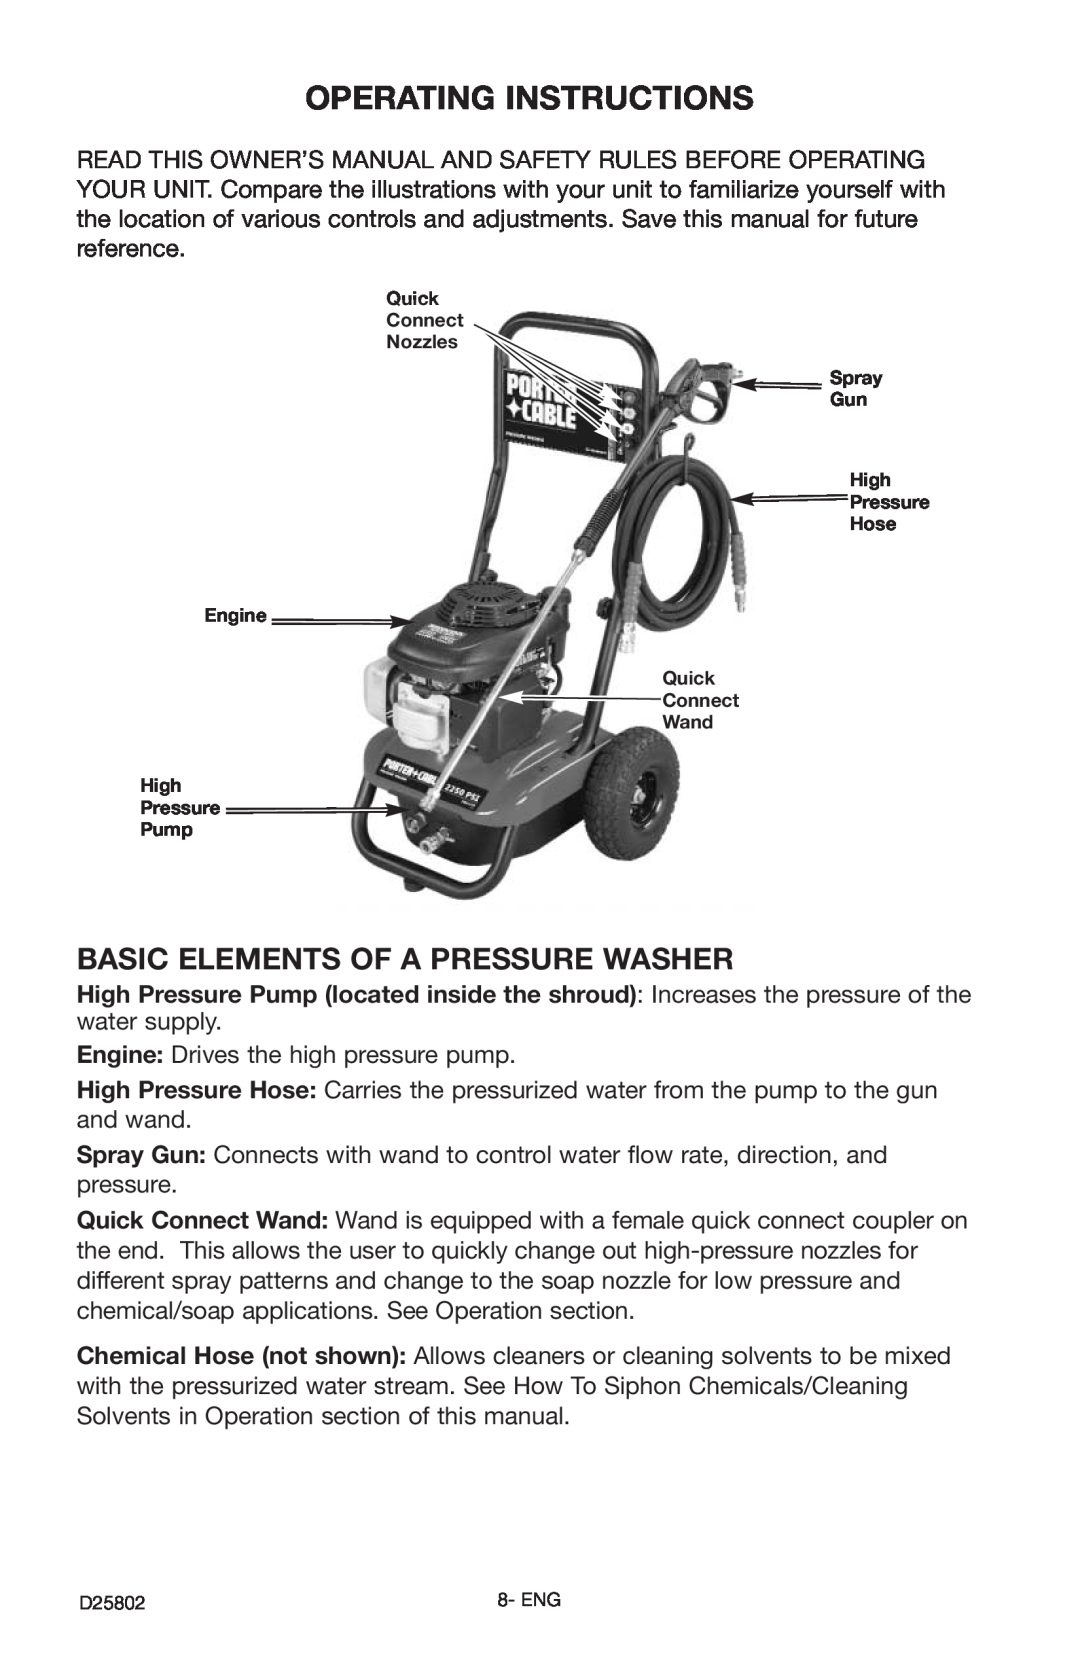 Porter-Cable PCV2250 instruction manual Operating Instructions, Basic Elements Of A Pressure Washer 